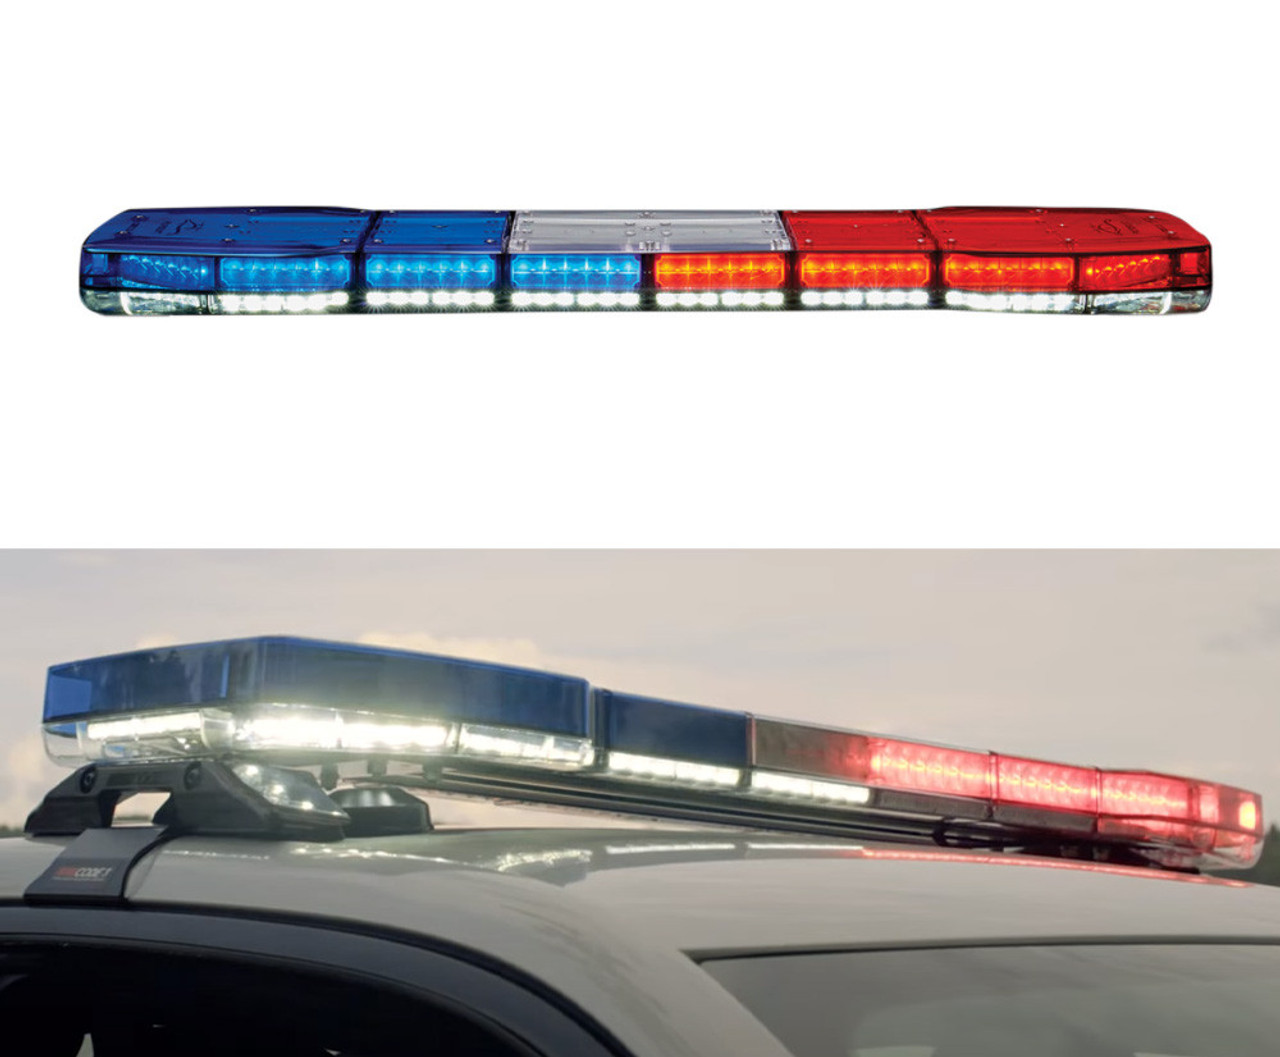 Code-3 Pursuit LED Light Bar, Dual Levels of Lighting Create Unique & Intense Flash Patterns, 53 inch, includes mounting hardware